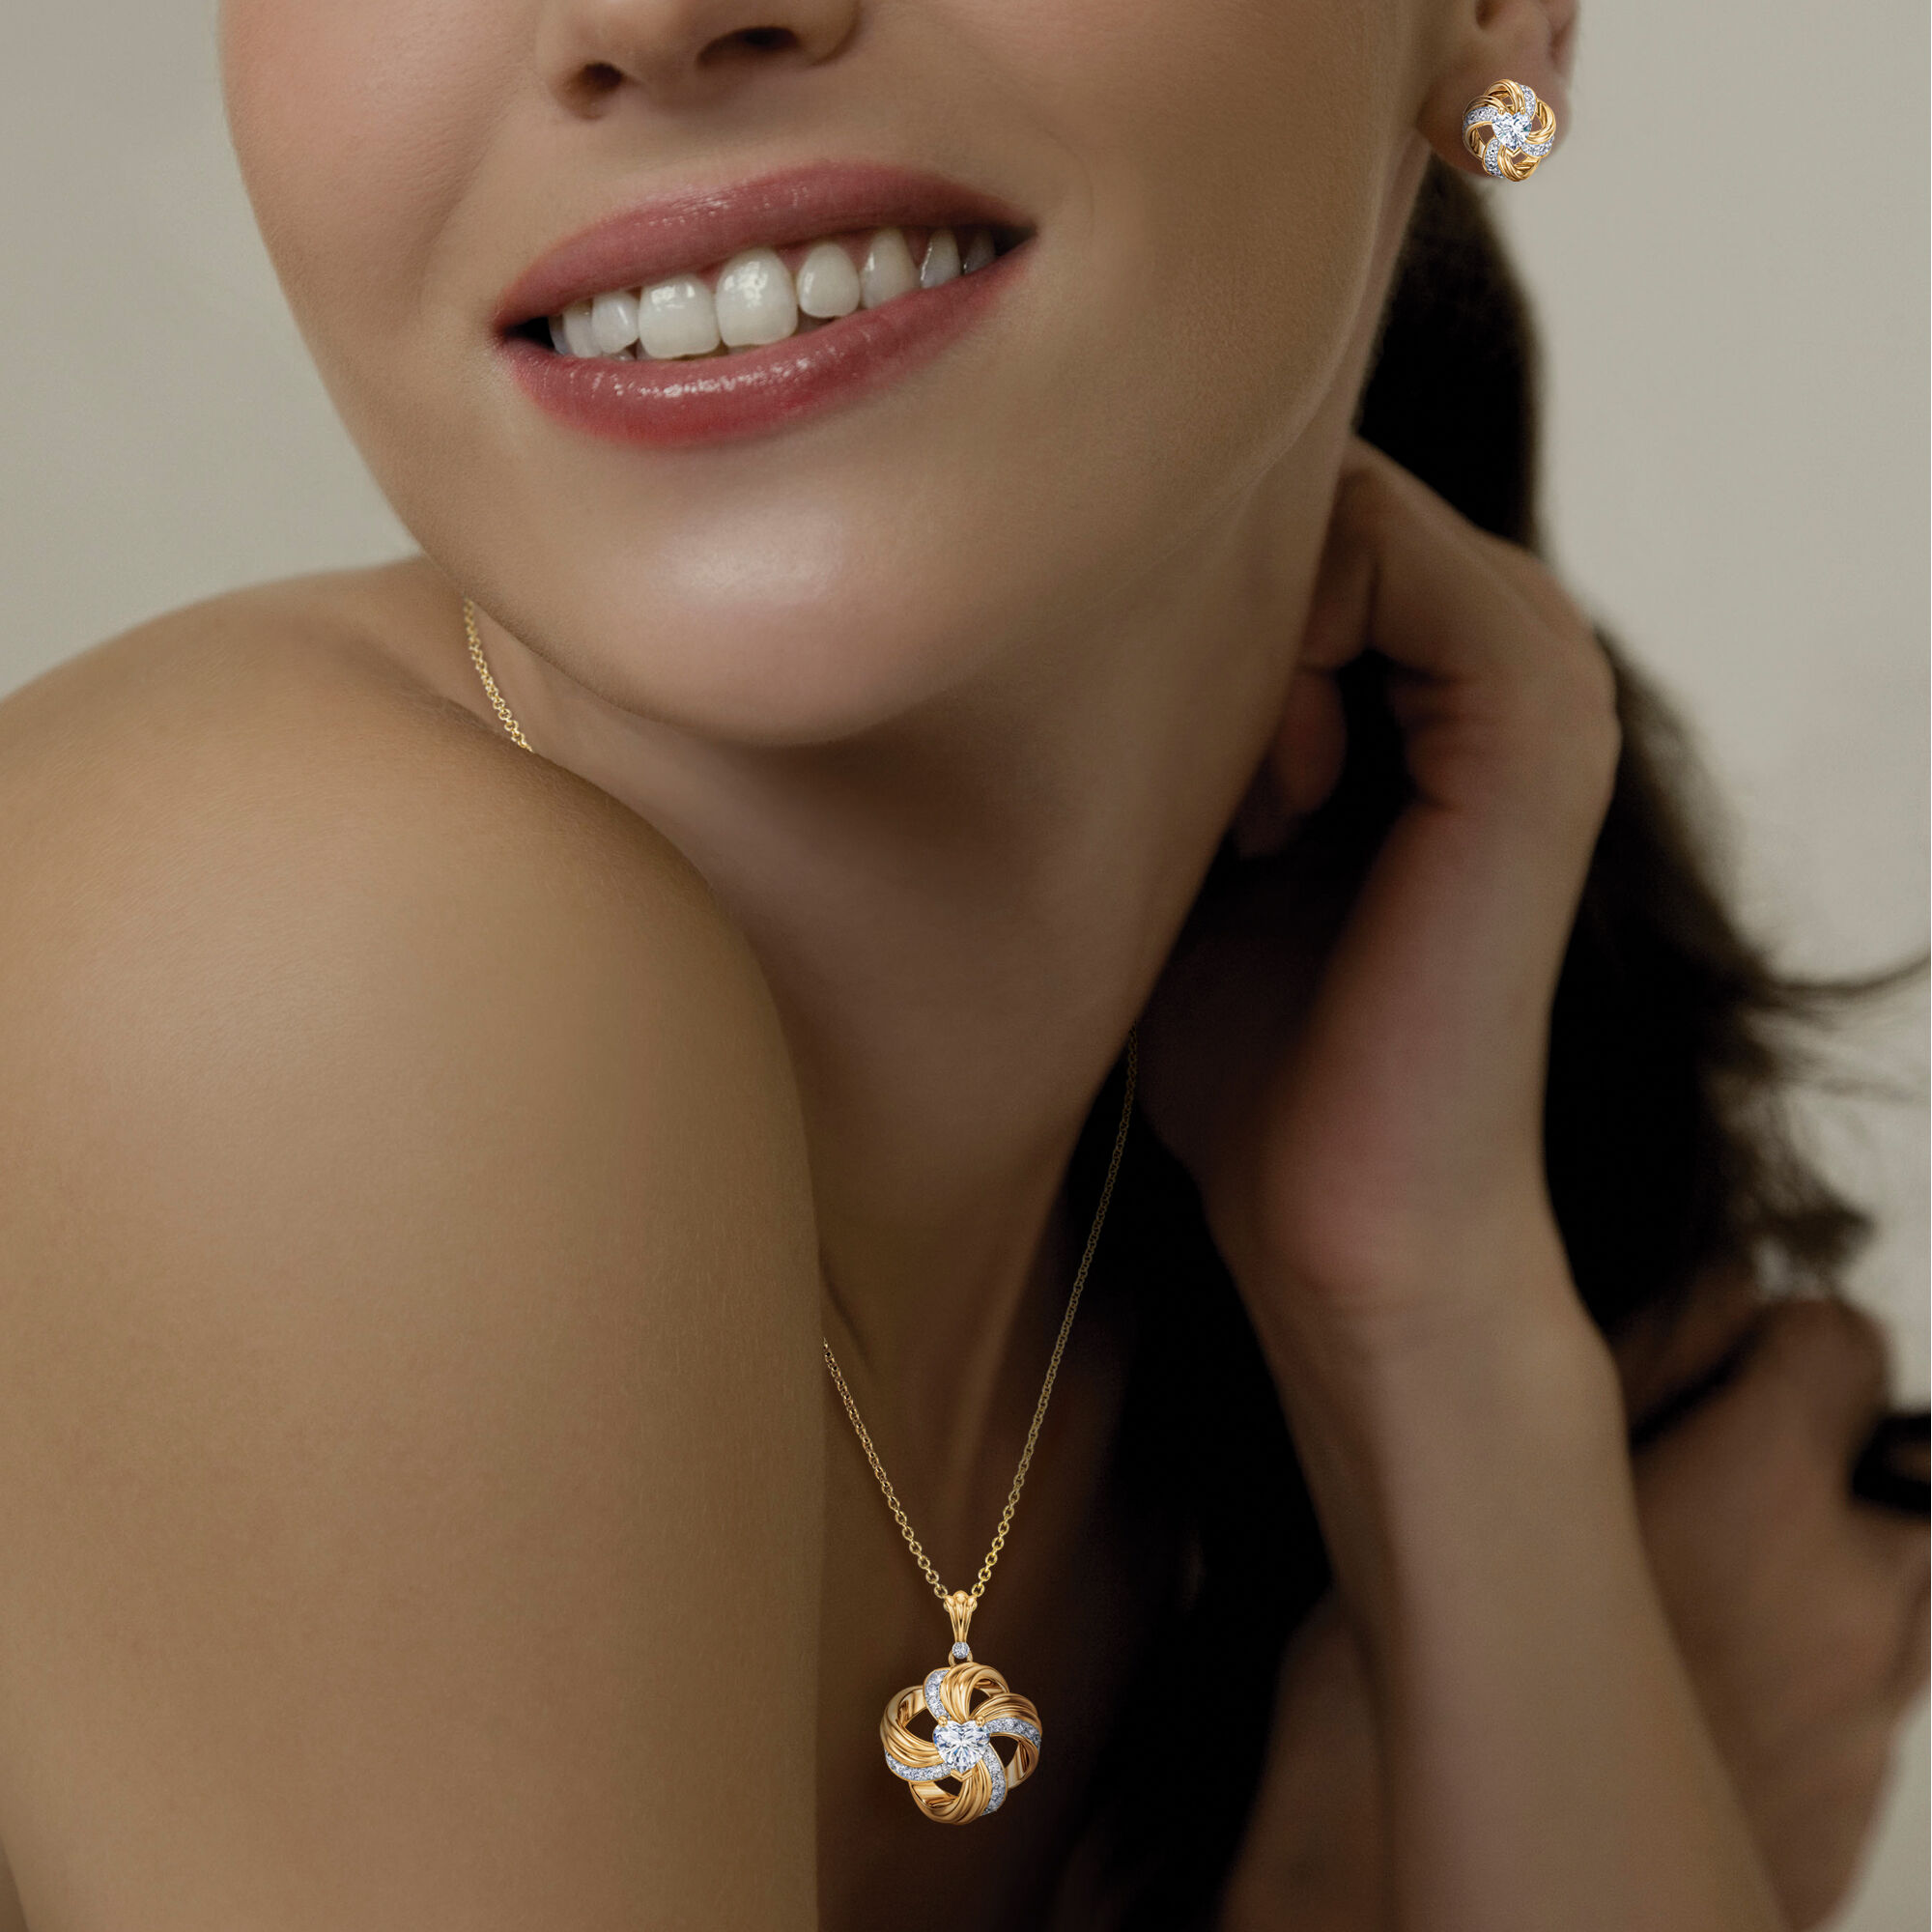 The Swirling Heart Pendant with FREE Matching Earrings 10891 0019 m model